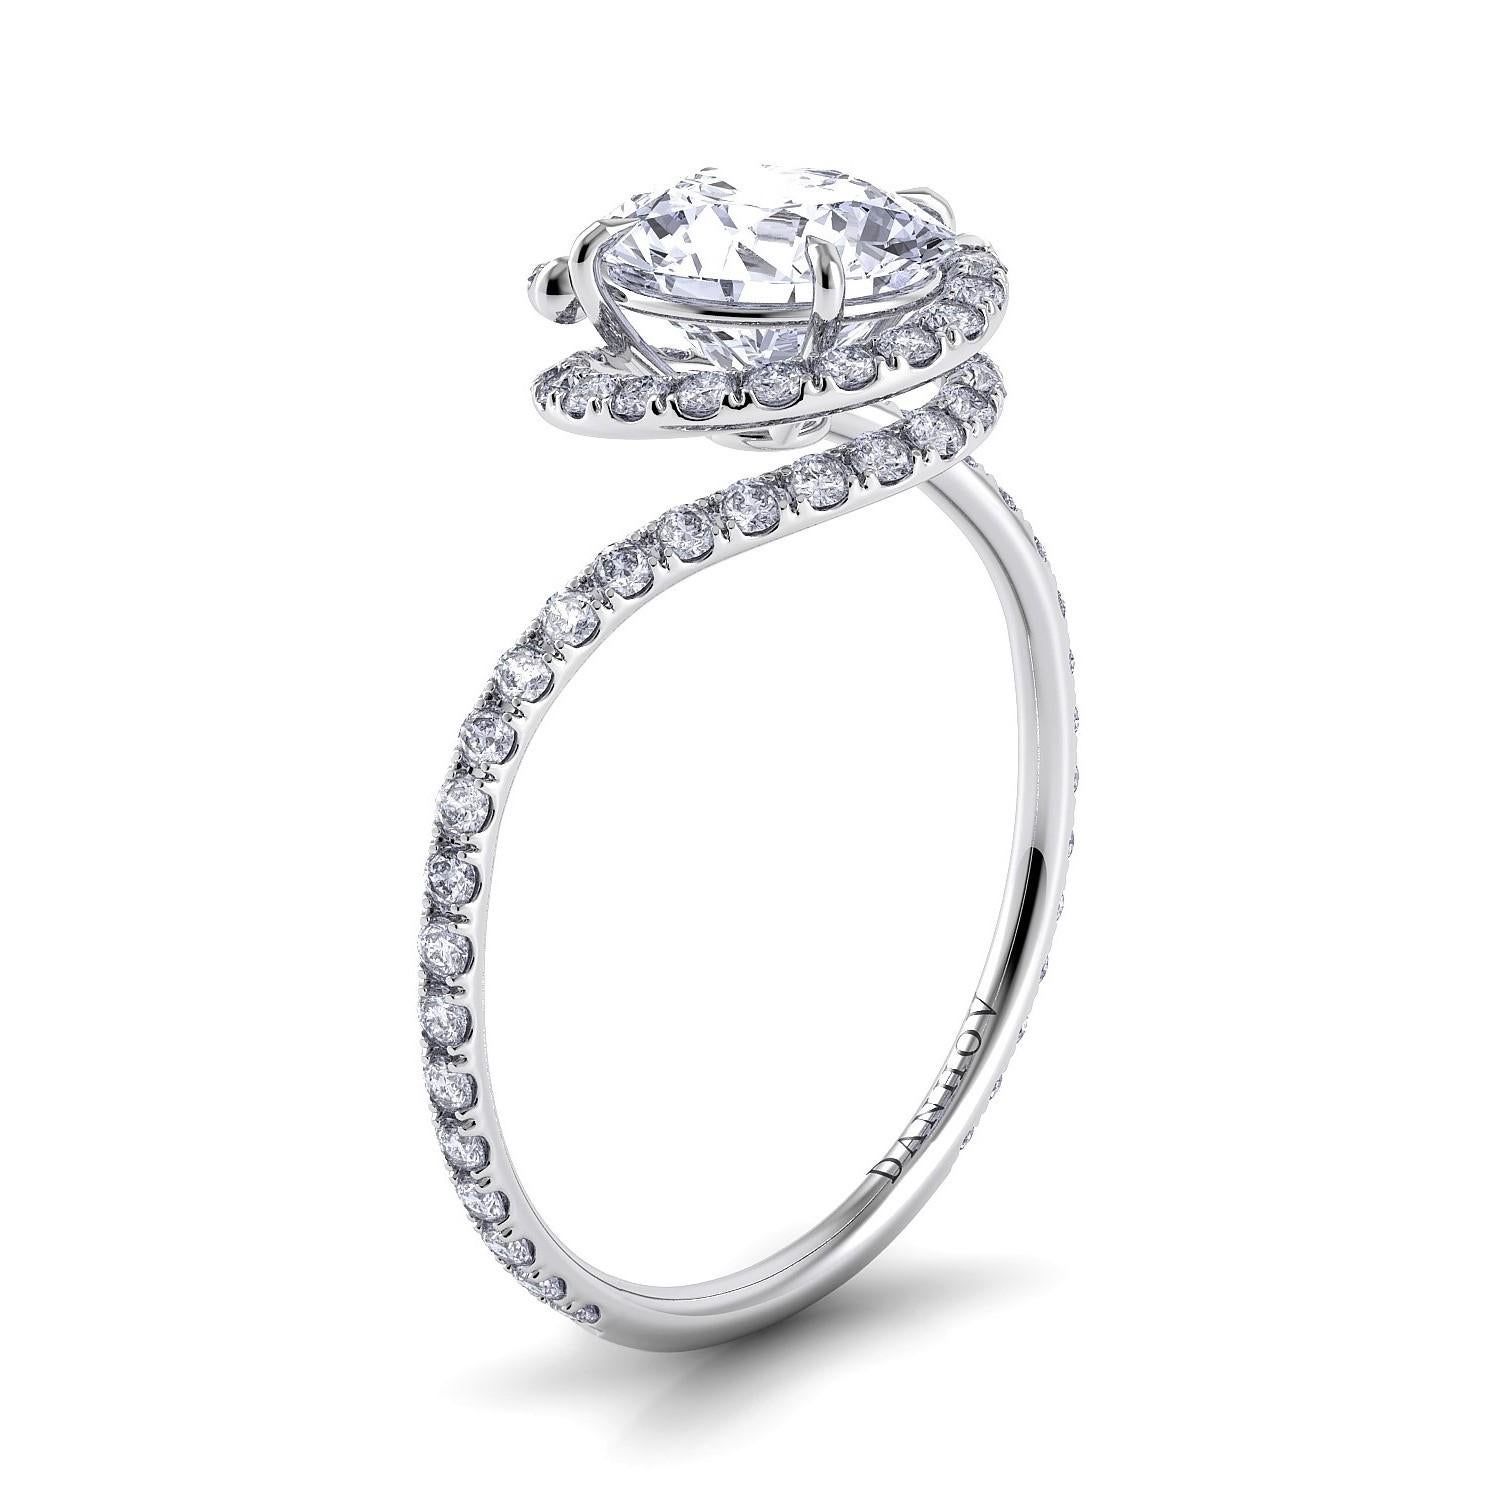 Abbraccio handmade engagement rings by Danhov 

Uniquely handmade, these designer engagement rings are the essence of true love’s perfect embrace featuring our iconic swirl holding the center diamond. Beginning with a single wire, it creates a band